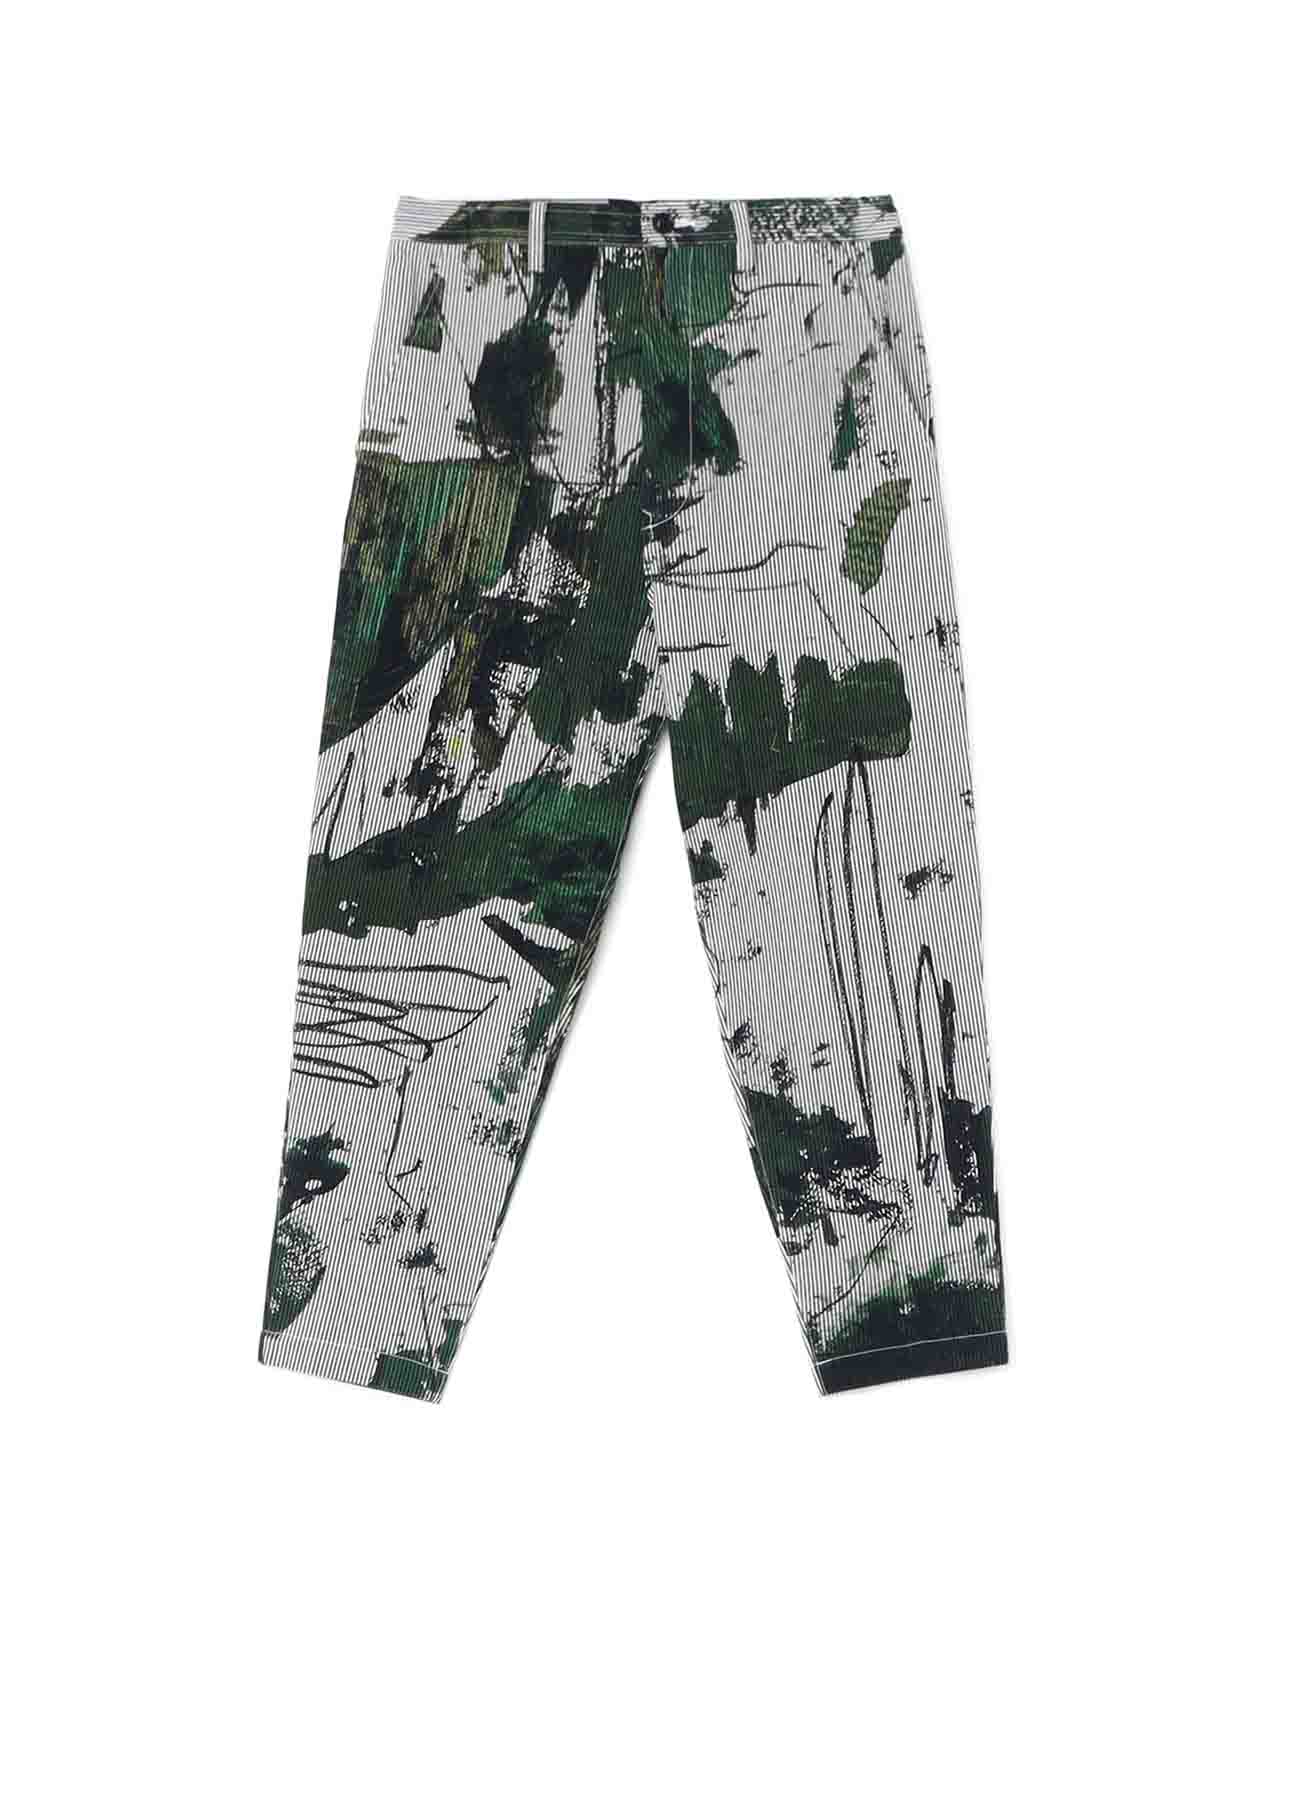 COTTON HICKORY ABSTRACT PAINT WAIST STRING SLIM PANTS